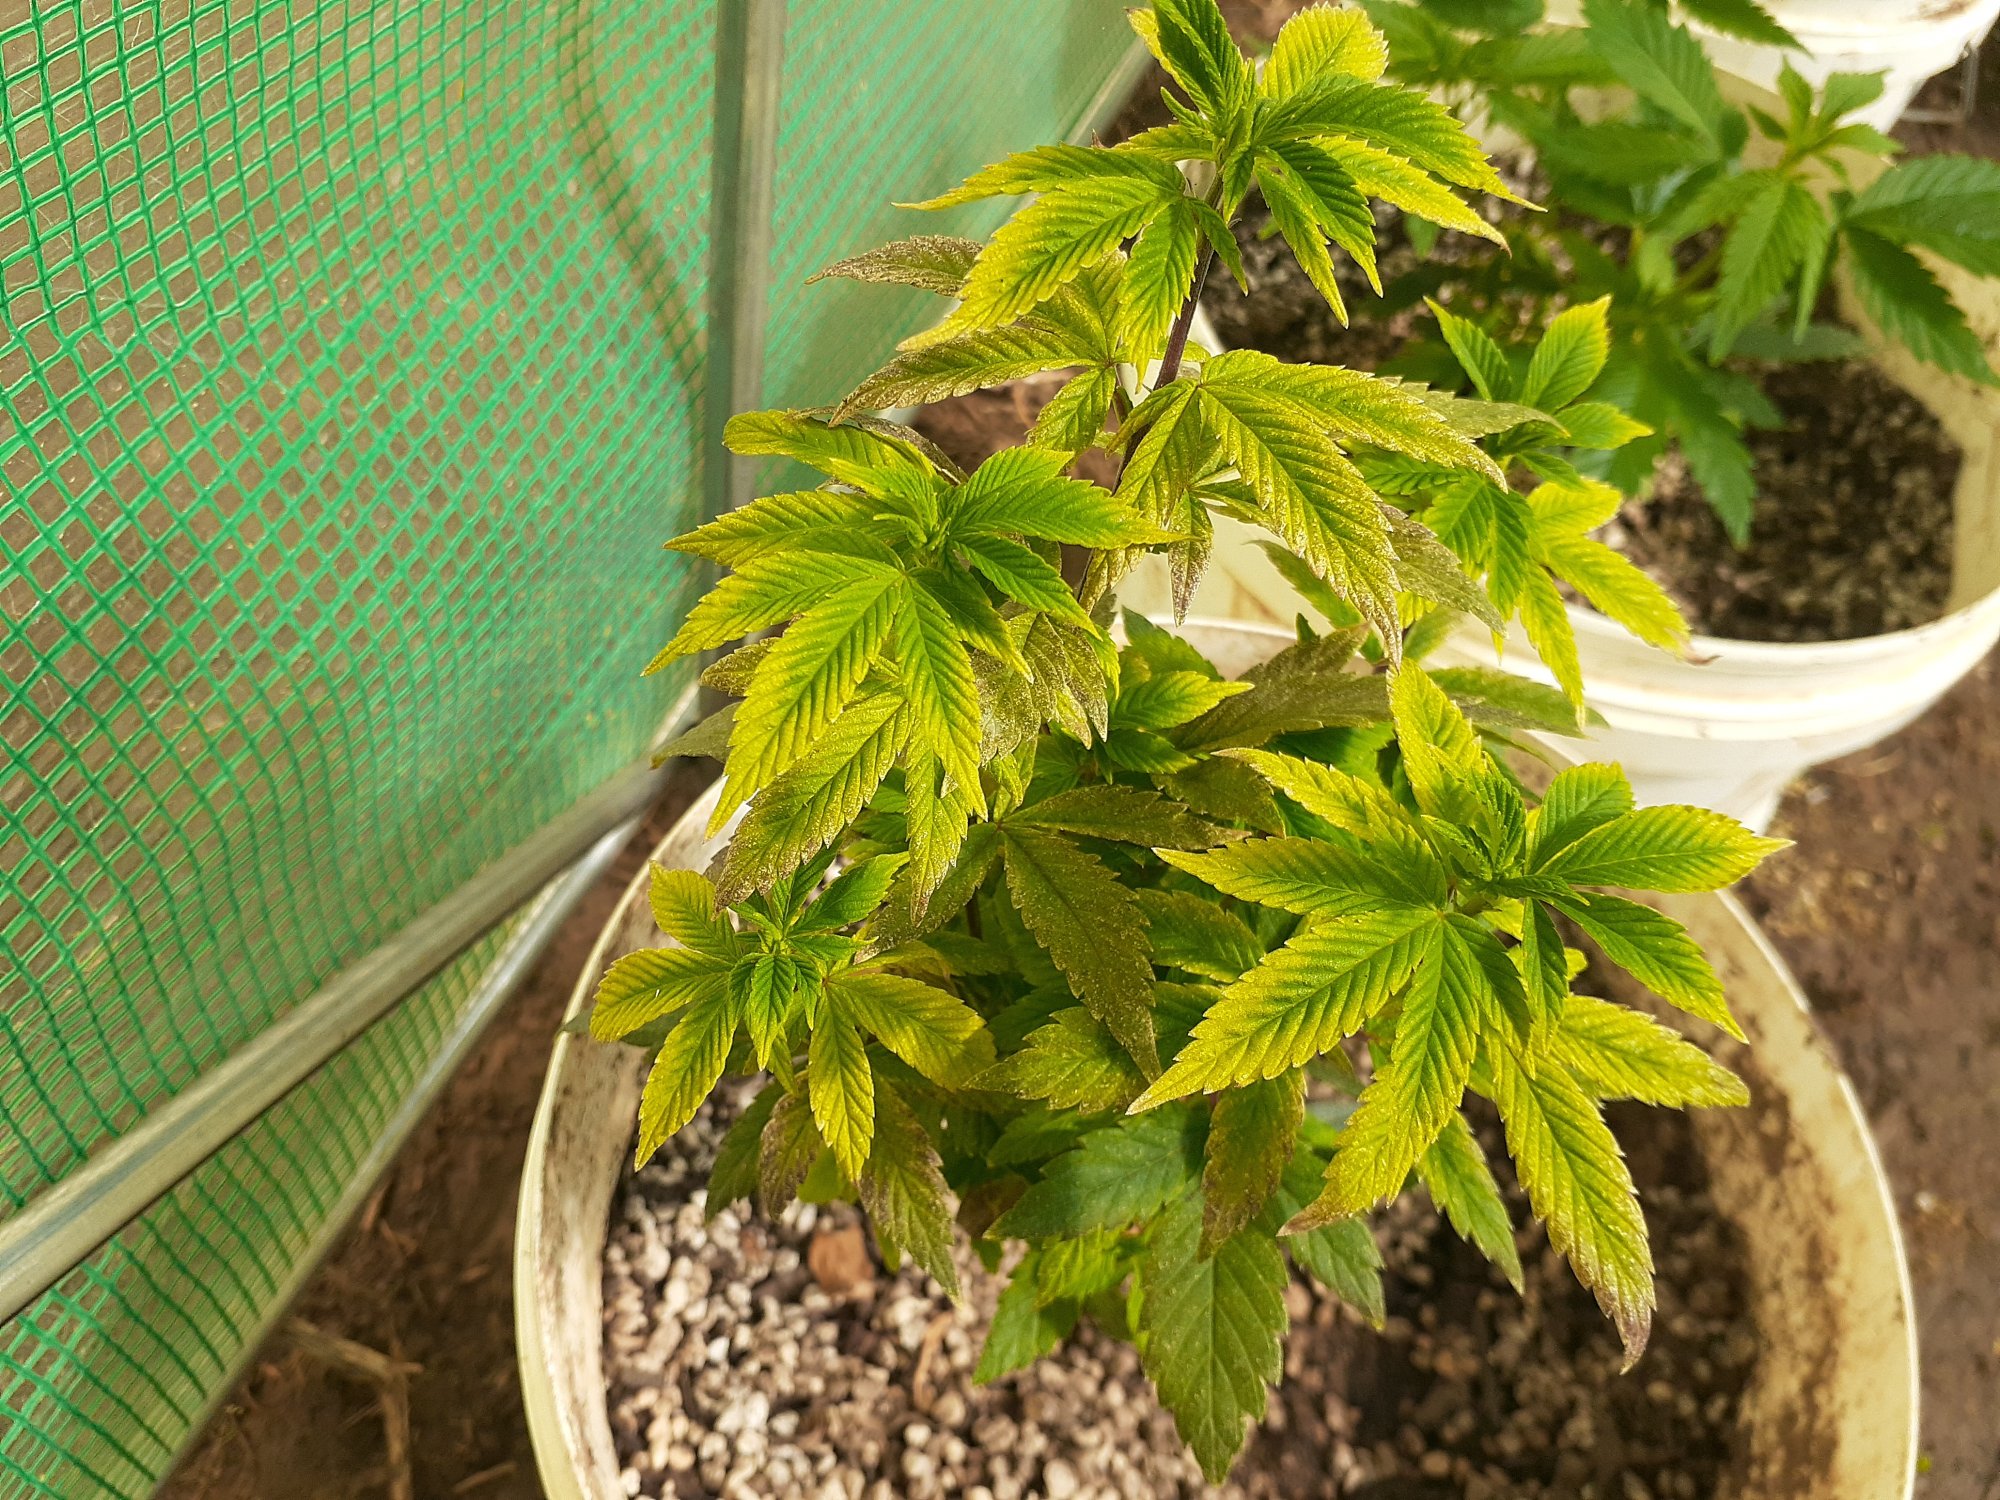 Having trouble my plant is very yellow